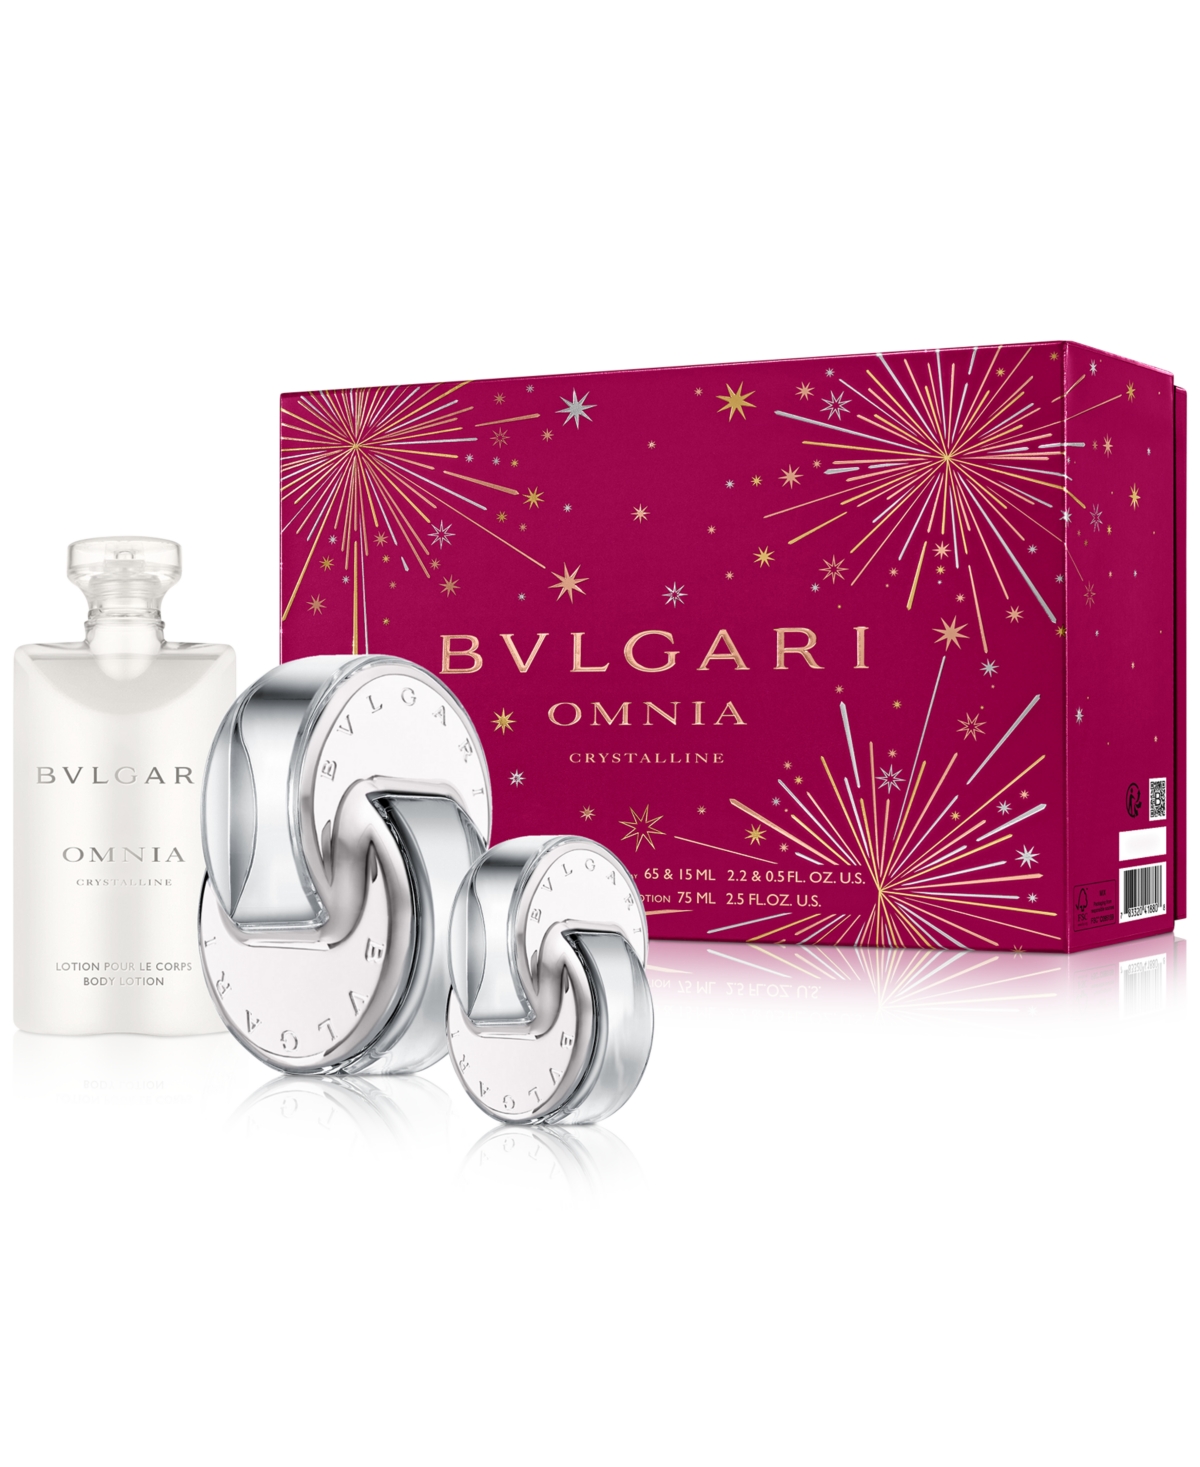 Bvlgari 3-Pc. Omnia Crystalline Holiday Gift Set, Created For